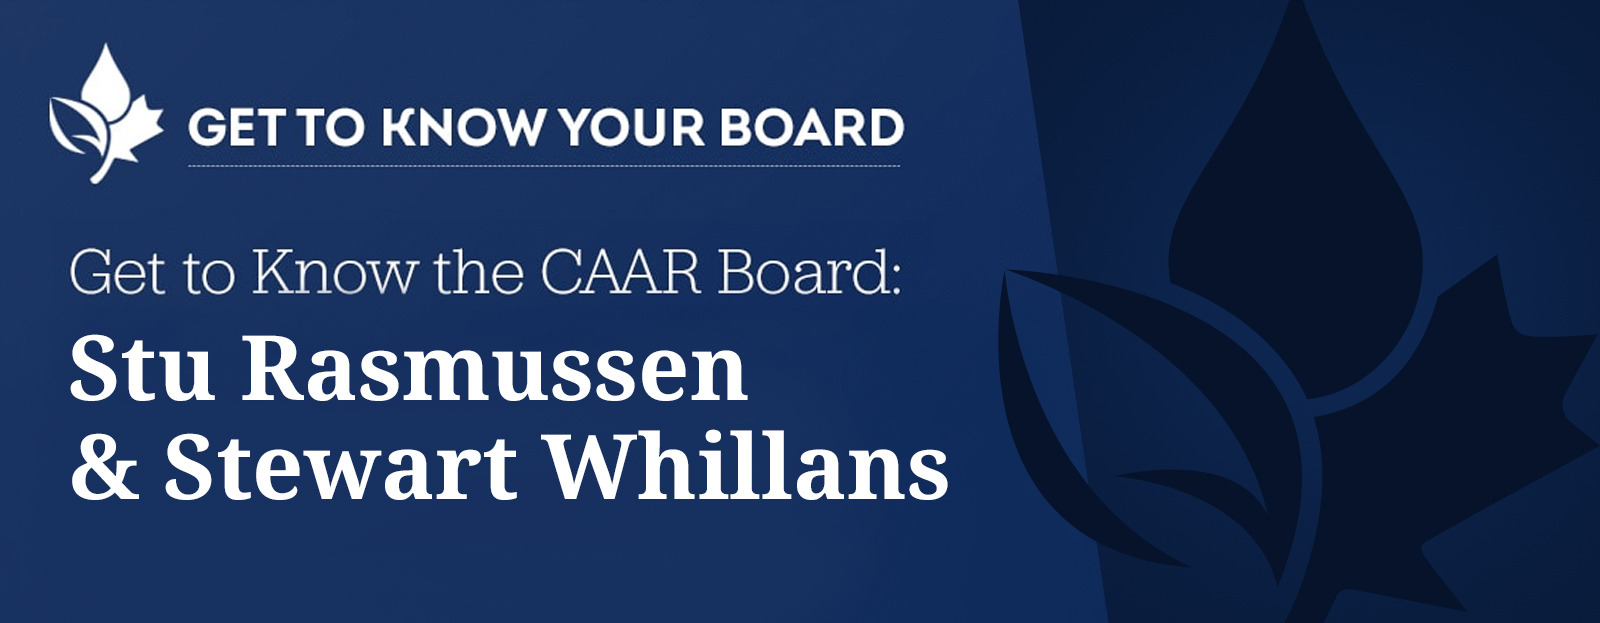 Banner for Get to Know CAAR Board